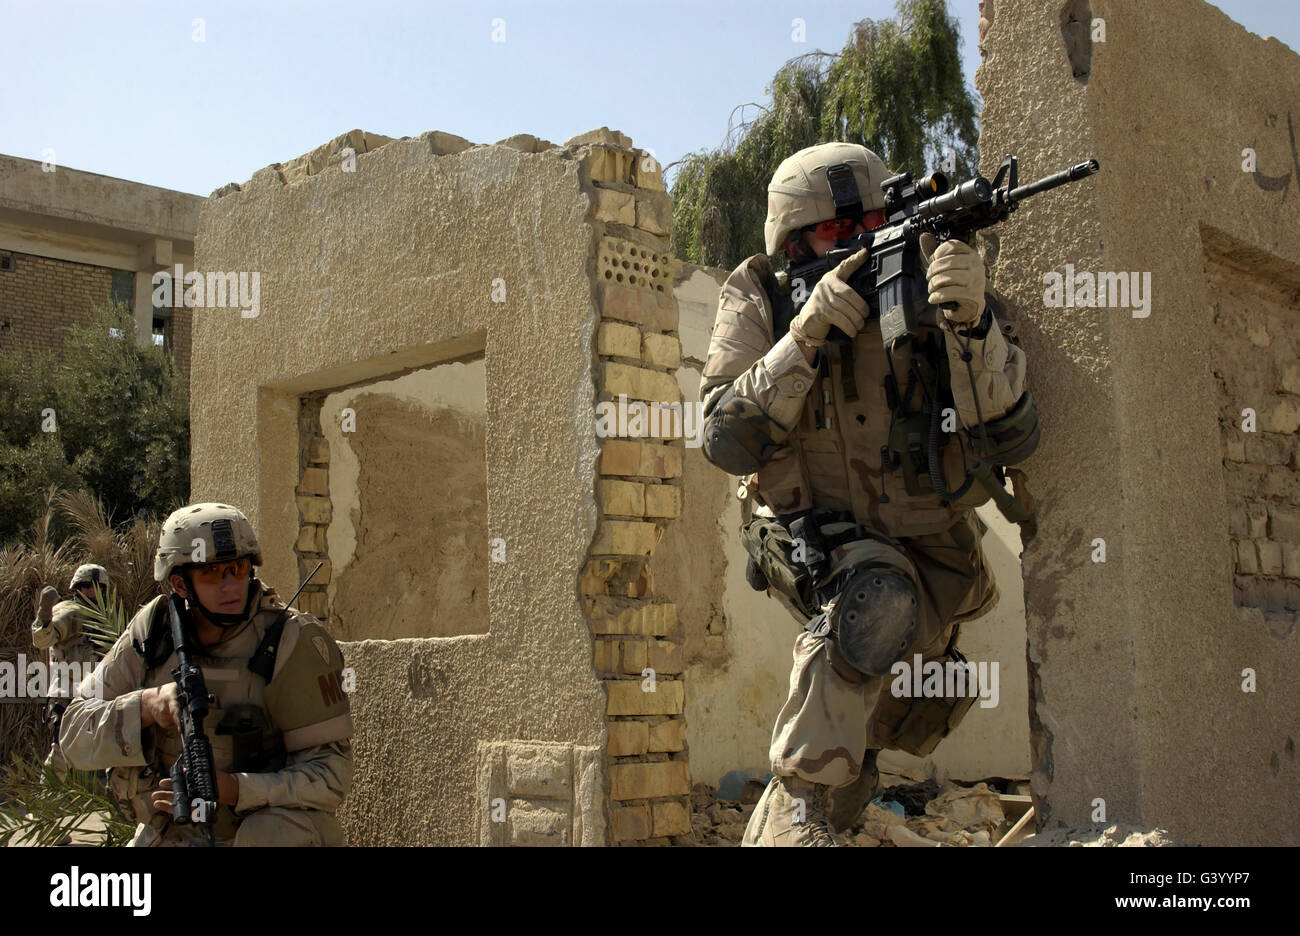 U.S. Army soldiers reacting to small arms fire in Al Madain, Baghdad, Iraq. Stock Photo